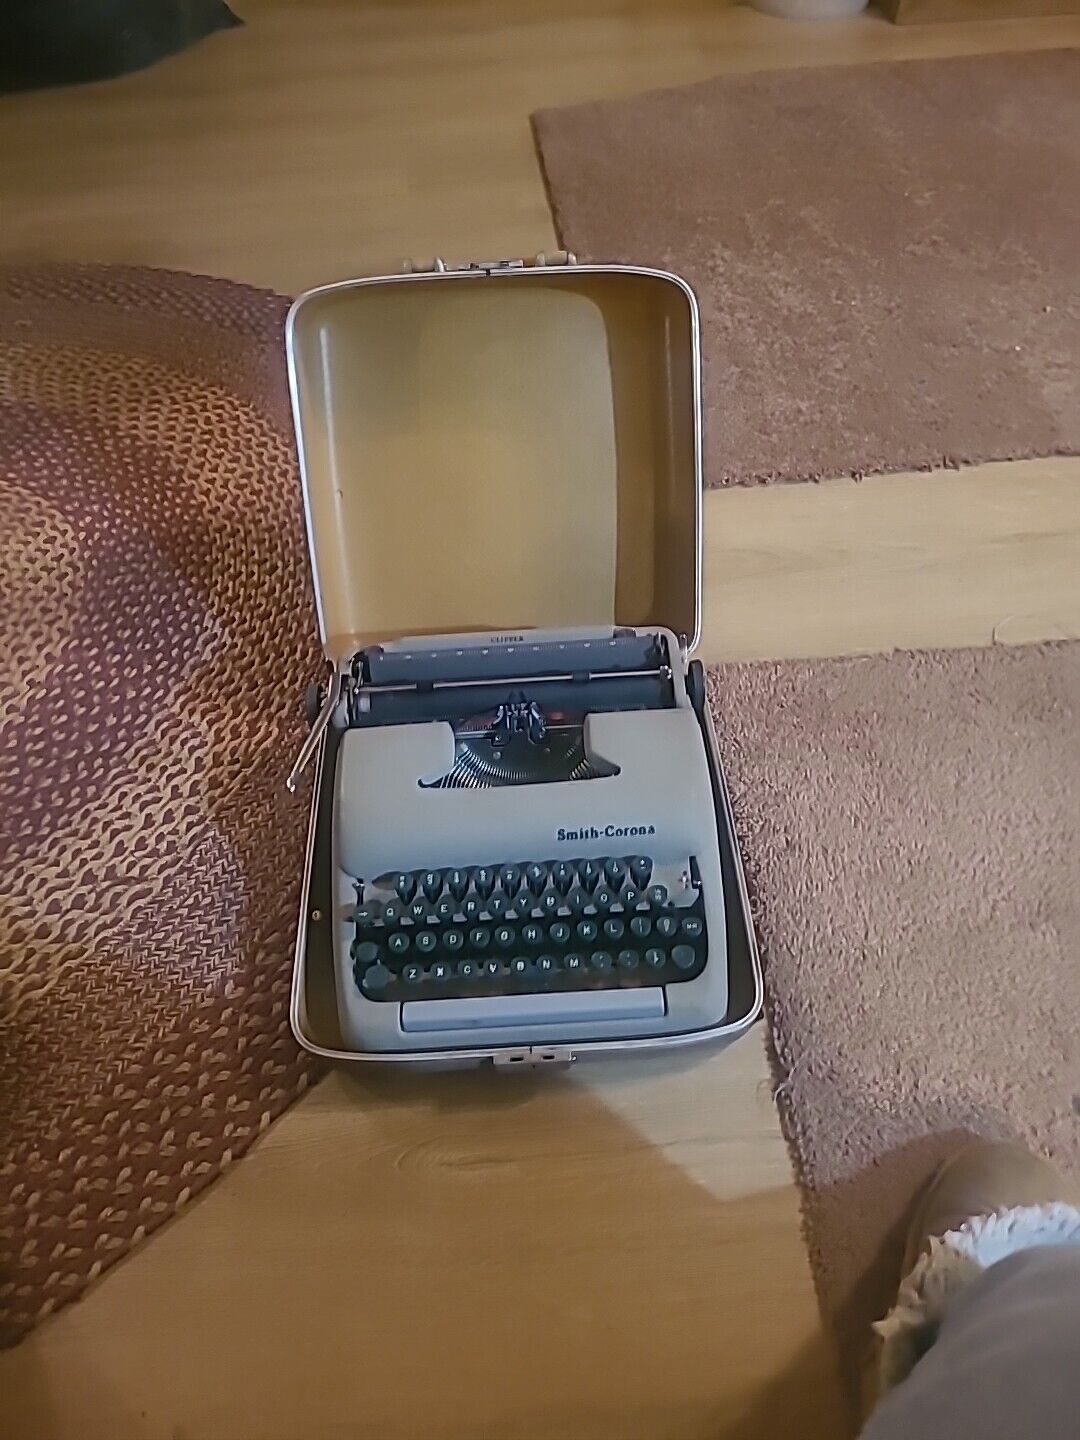 1958 Smith-Corona Clipper Working Vintage Portable Typewriter New Info added.